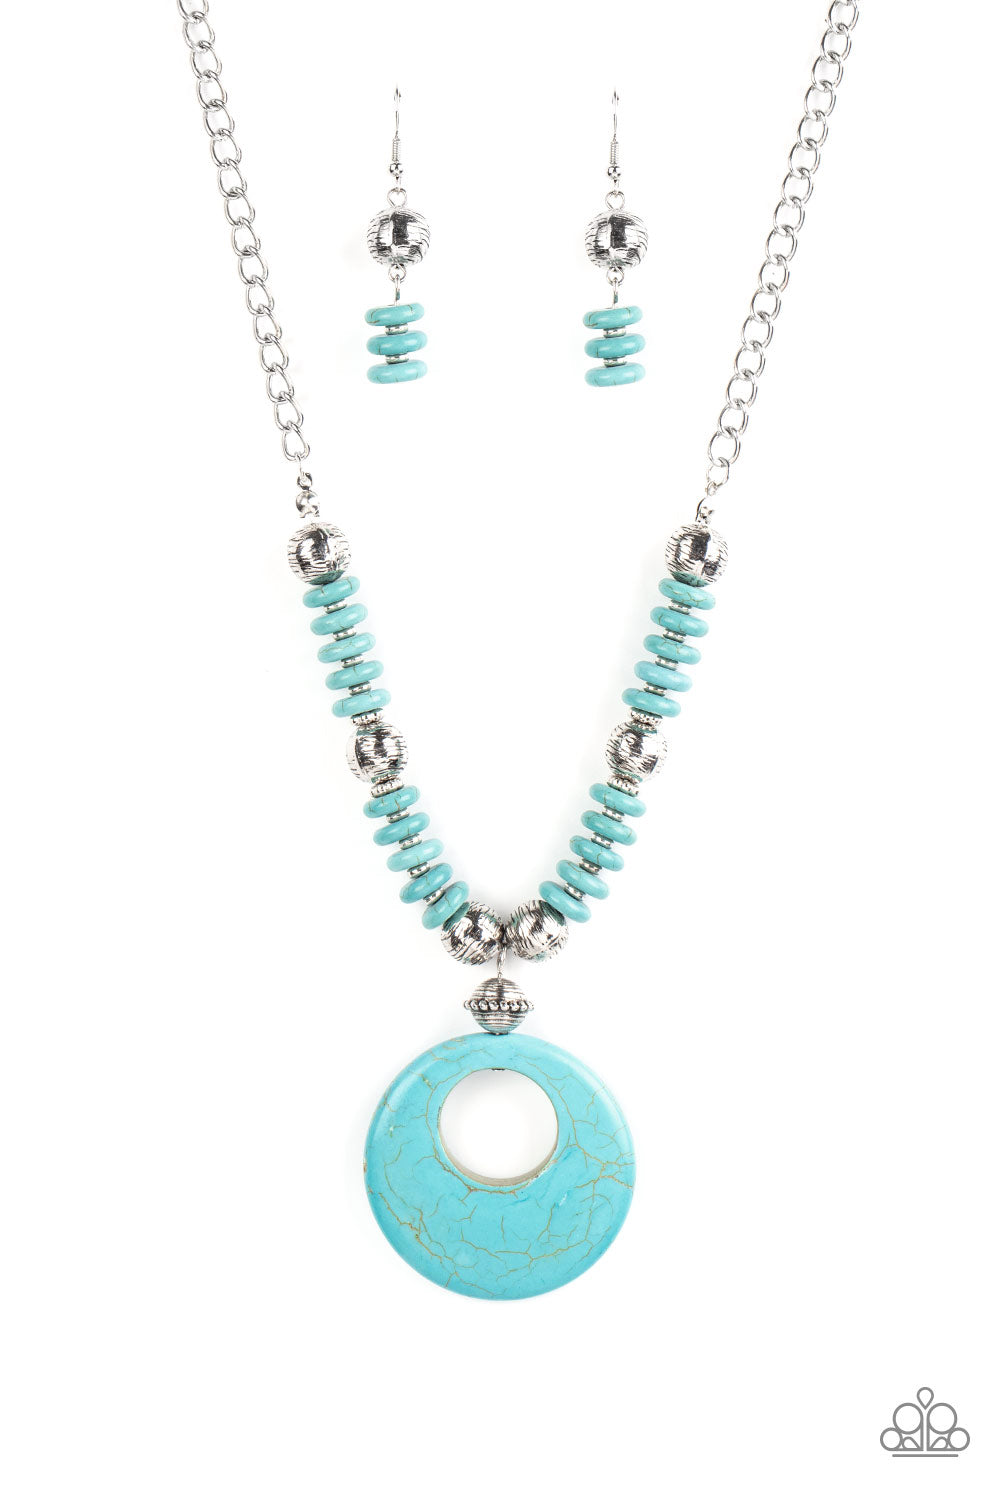 Oasis Goddess - Blue/Turquoise necklace (2021 FALL "PREVIEW")